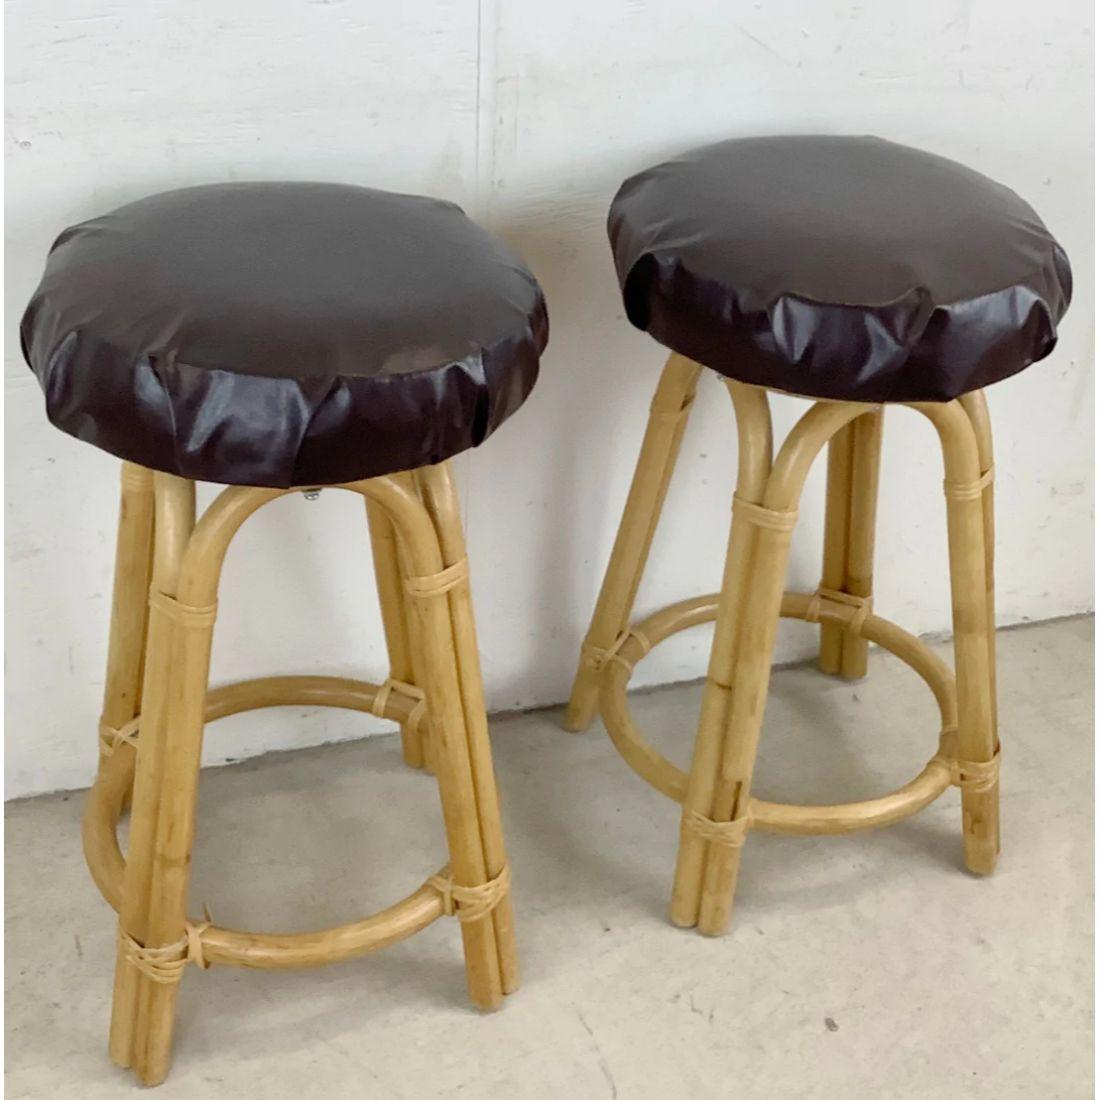 This stylish pair of boho modern swivel barstools stand at 28 inches tall, a uniquely versatile height for use with some counter heights as well as bar height- the simple bamboo construction frame is topped with a comfortable easily reupholstered